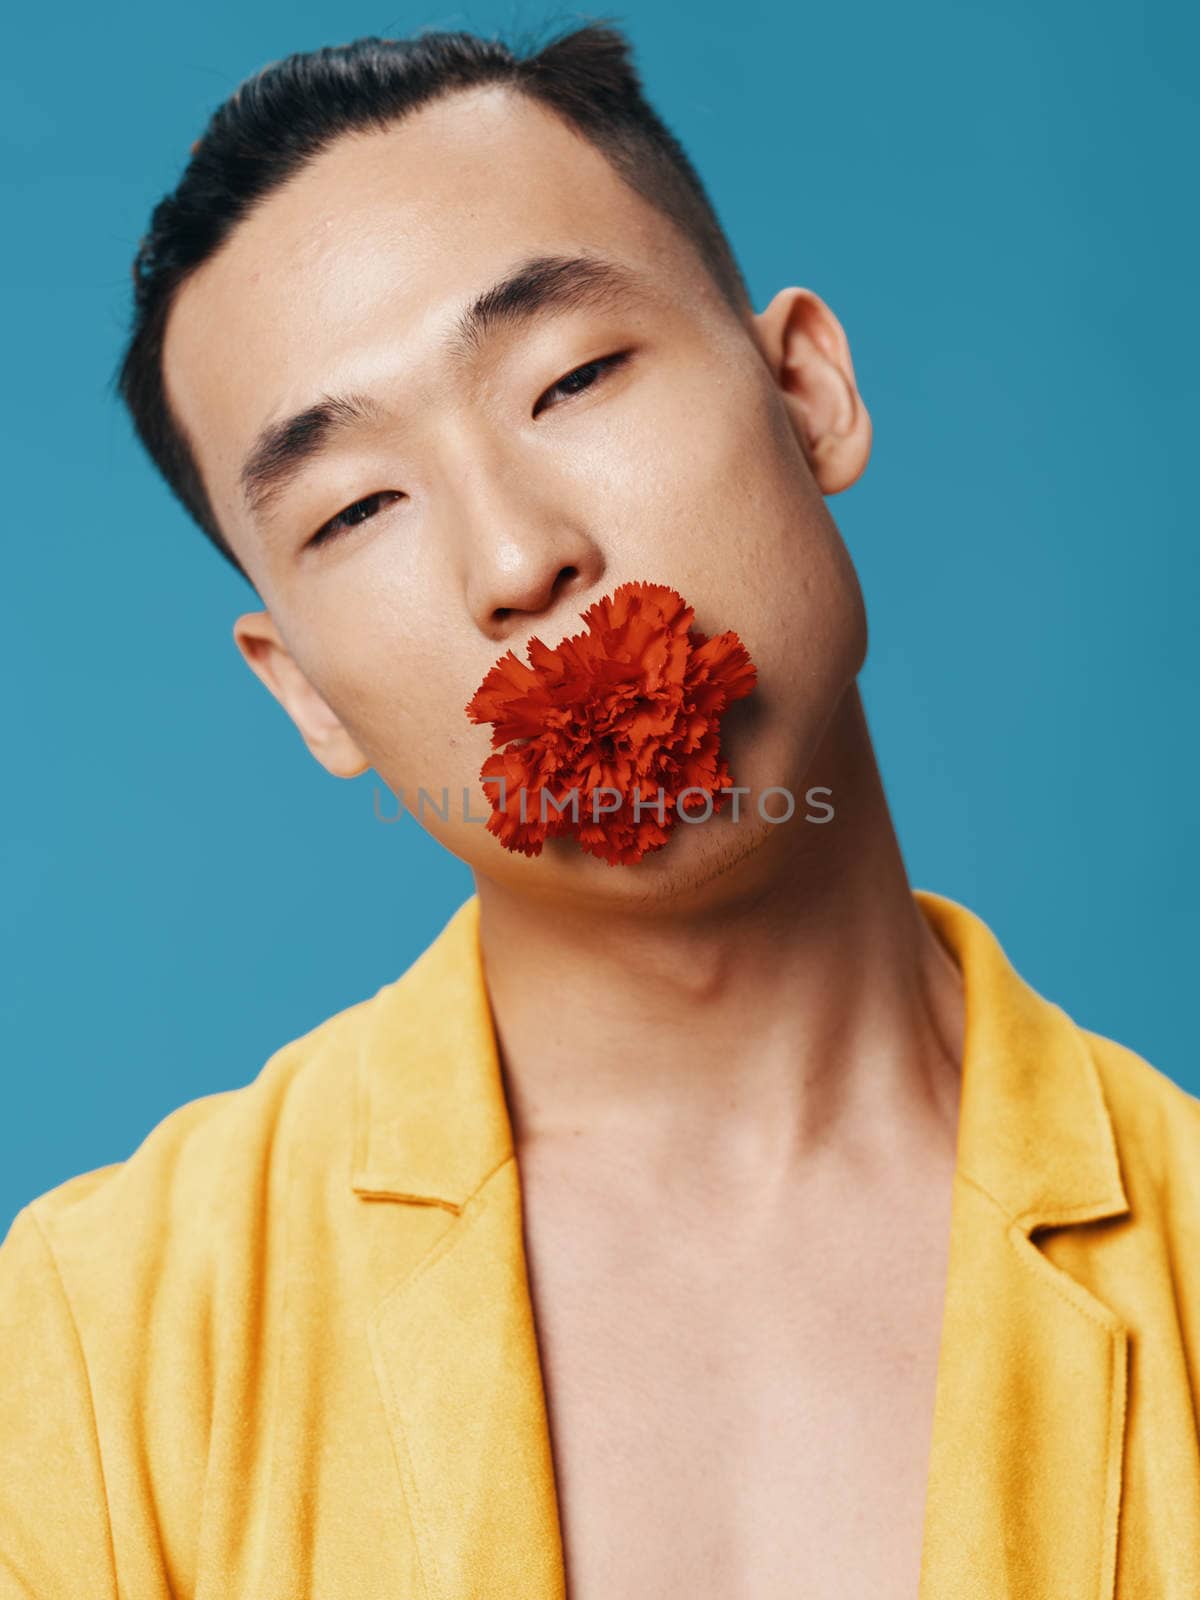 A man in a yellow coat with a red flower in his mouth on a blue background Asian appearance. High quality photo